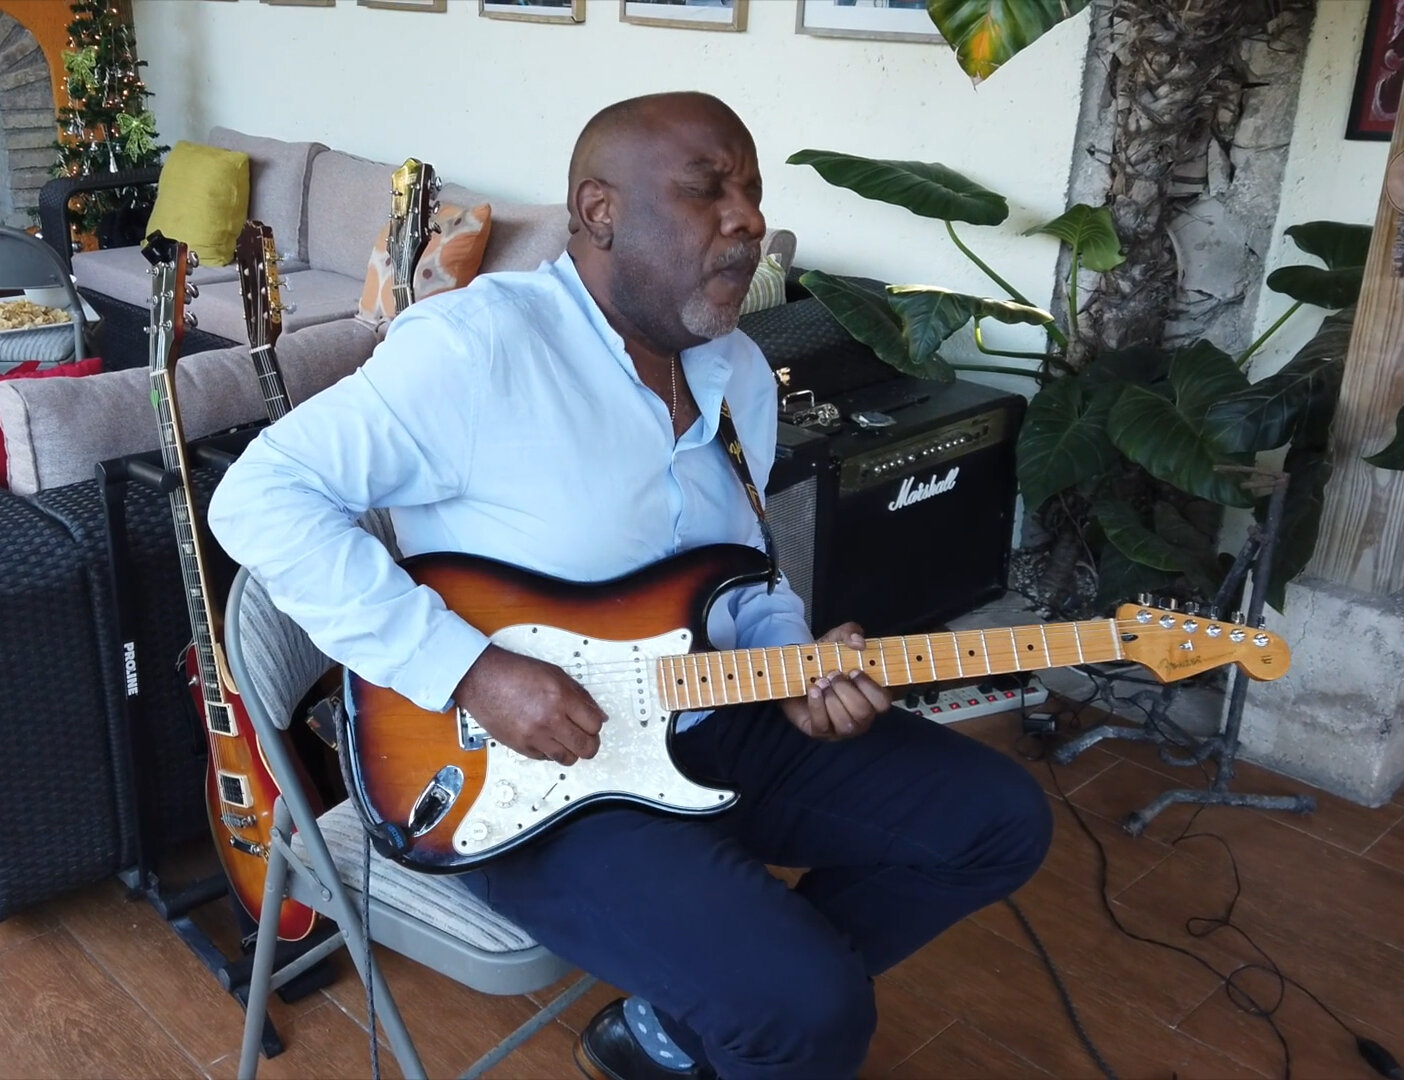 Haitian musician Clement Keke Belizaire expressed distress at the divisions in Haitian society, and said Haiti’s diversity should be relied on as a strength.